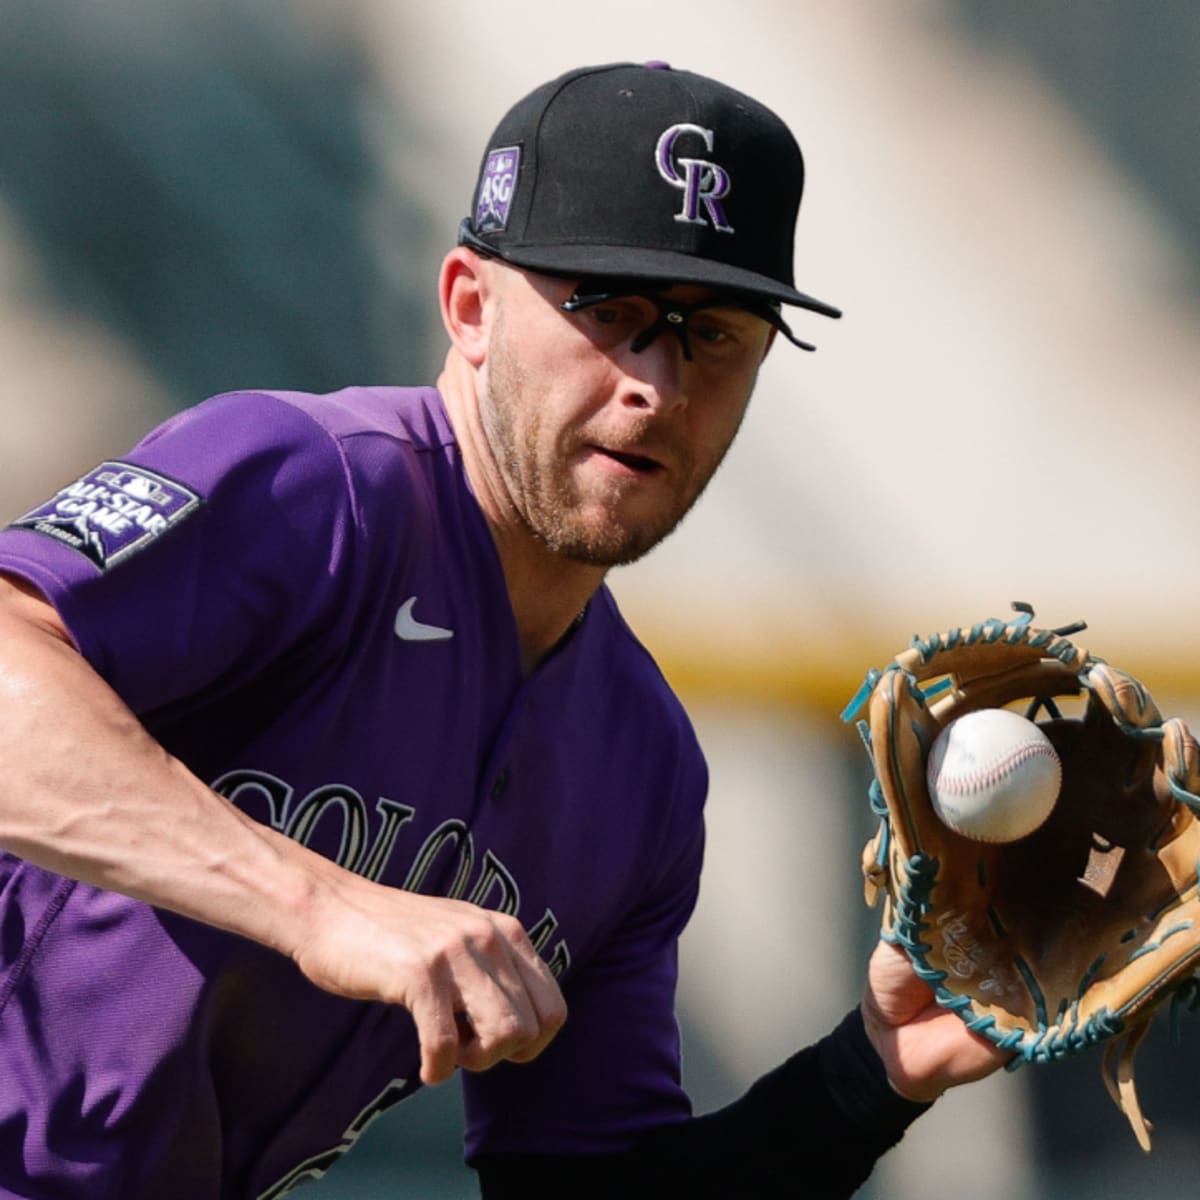 Storybook Ending: What Can We Expect From Trevor Story in Boston?